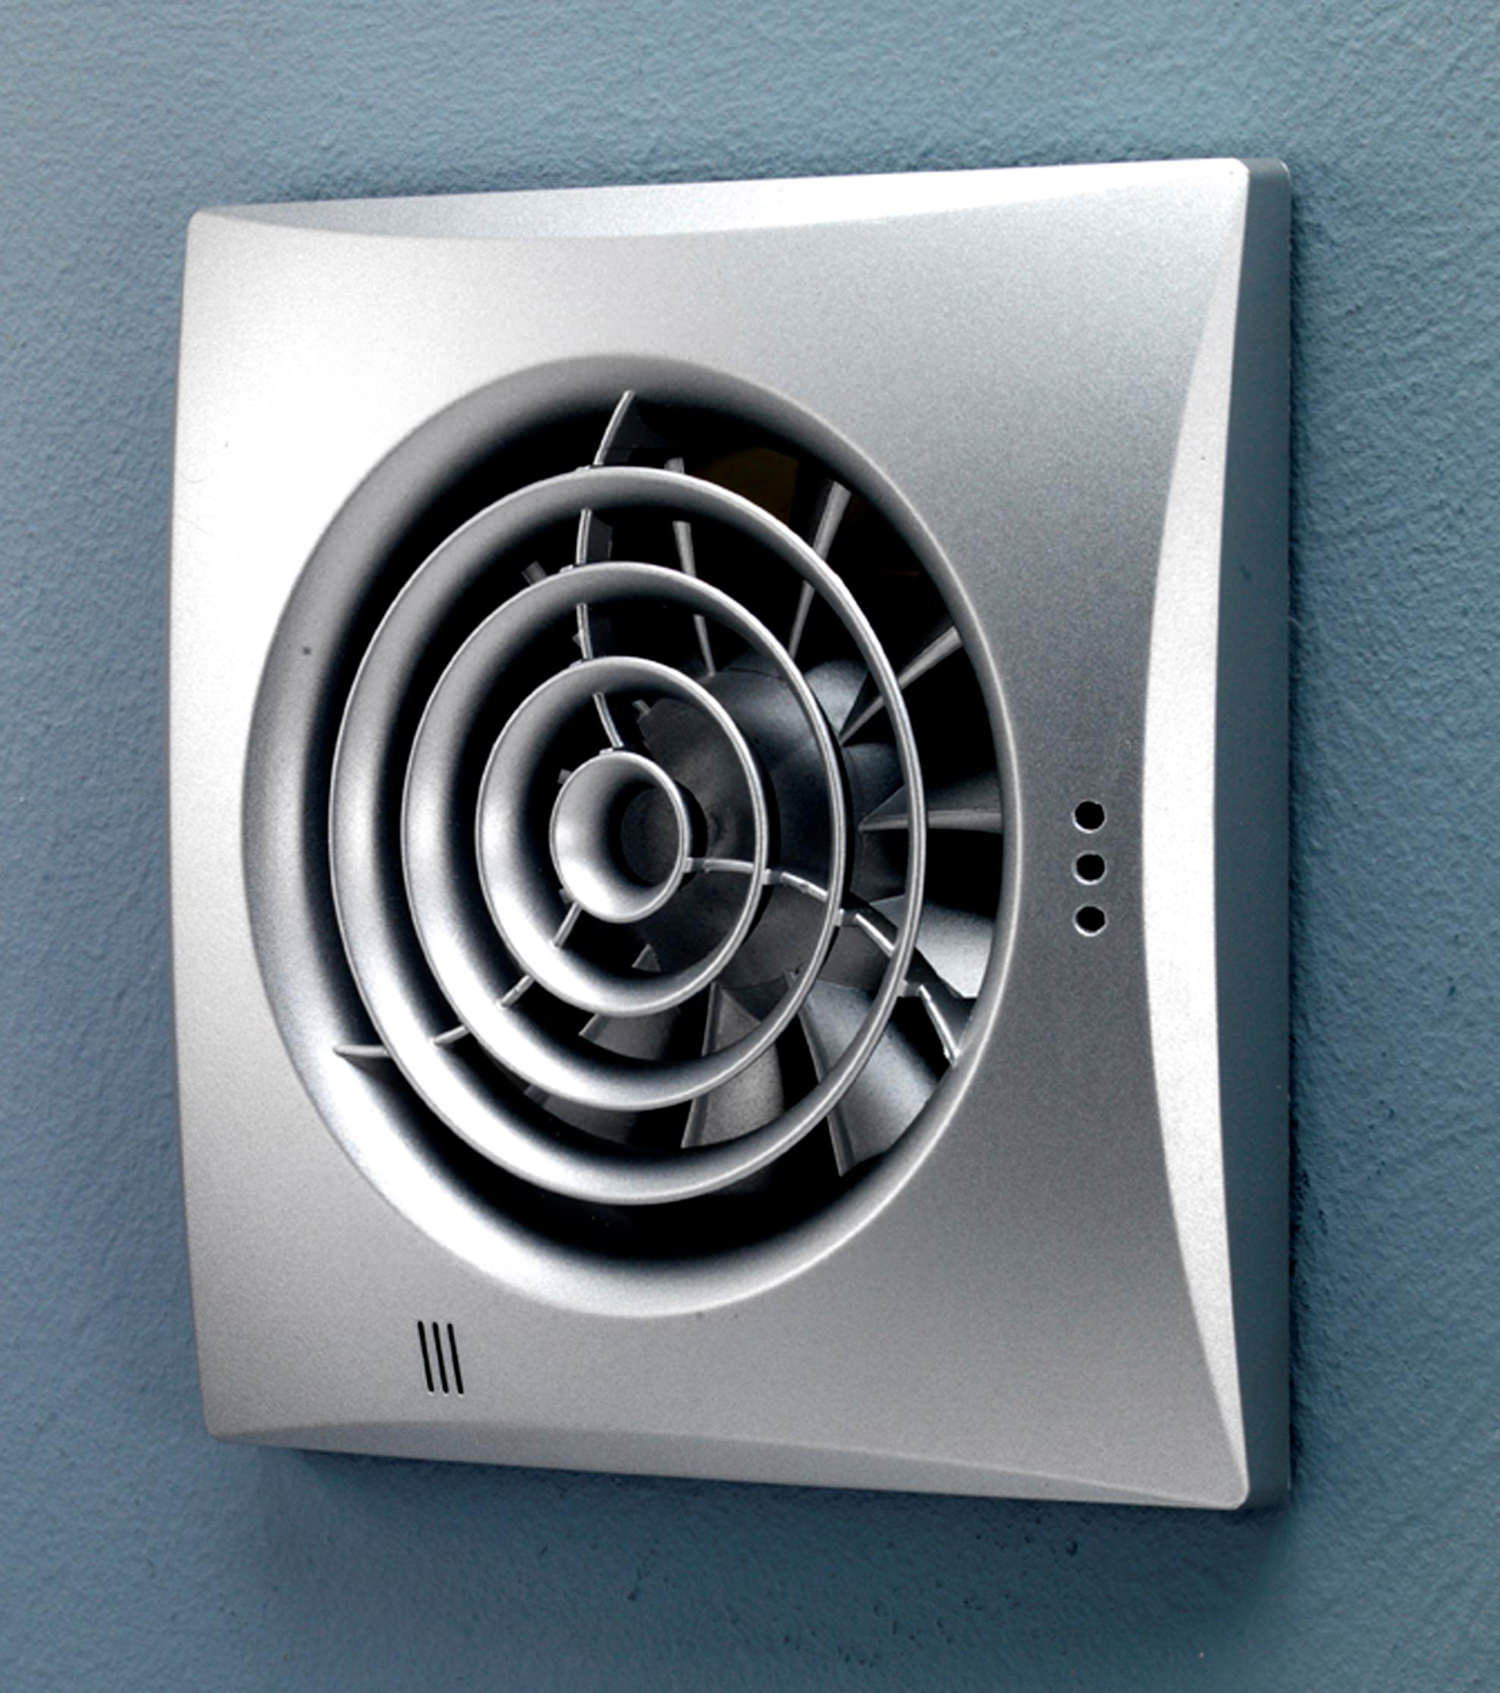 Hib Hush Wall Mounted Extractor Fan With Timer And Humidity Sensor intended for dimensions 1500 X 1693